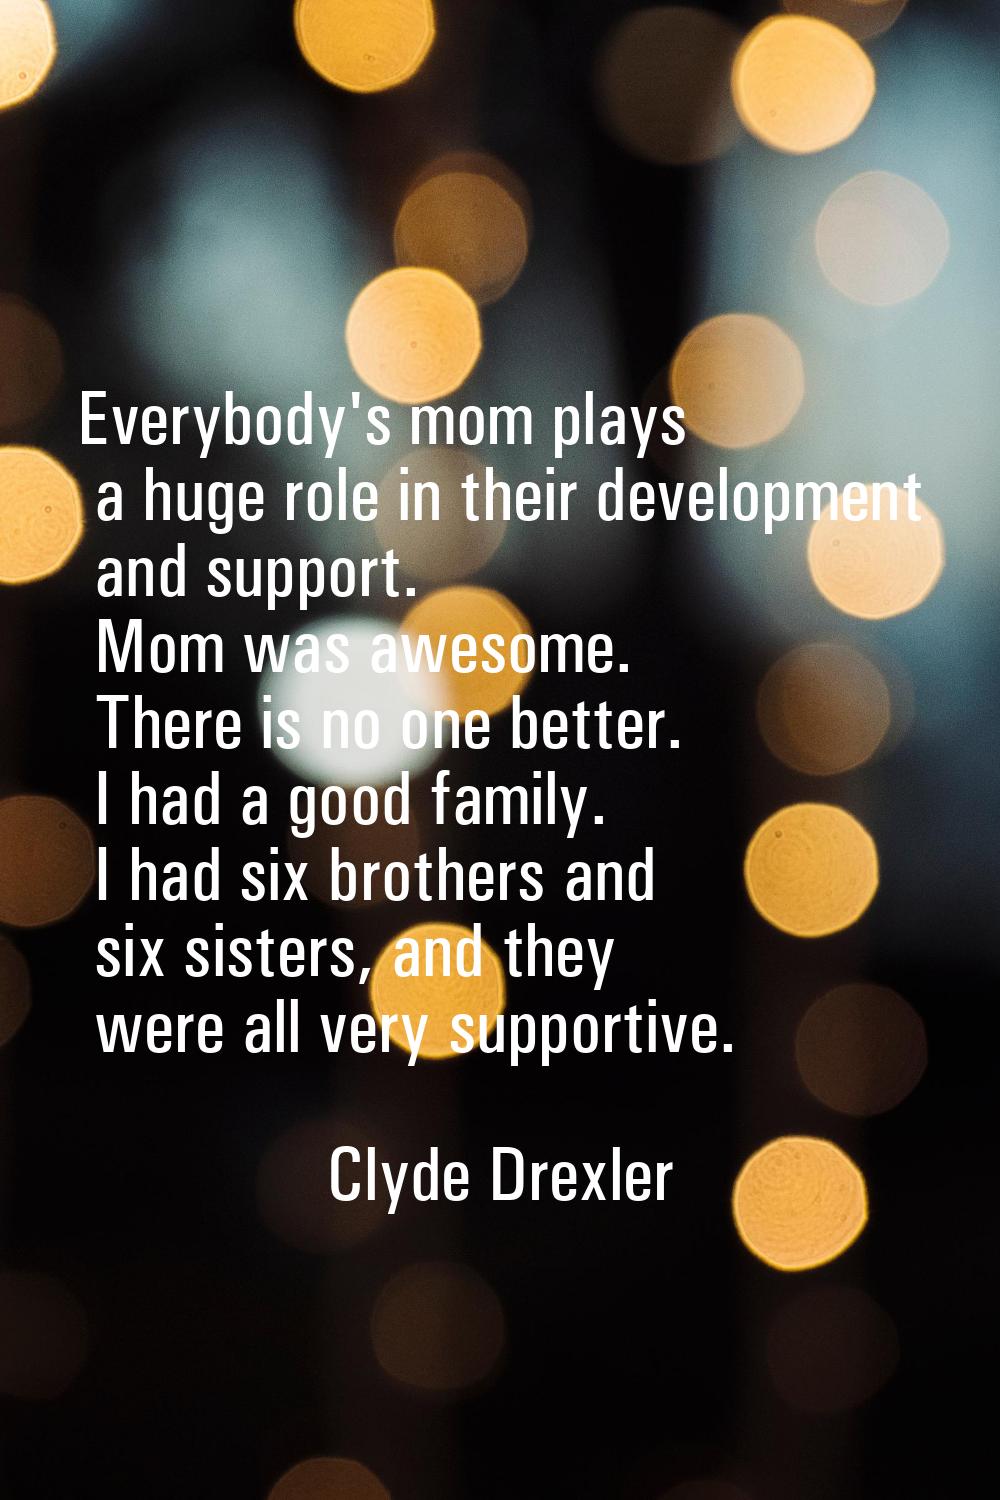 Everybody's mom plays a huge role in their development and support. Mom was awesome. There is no on